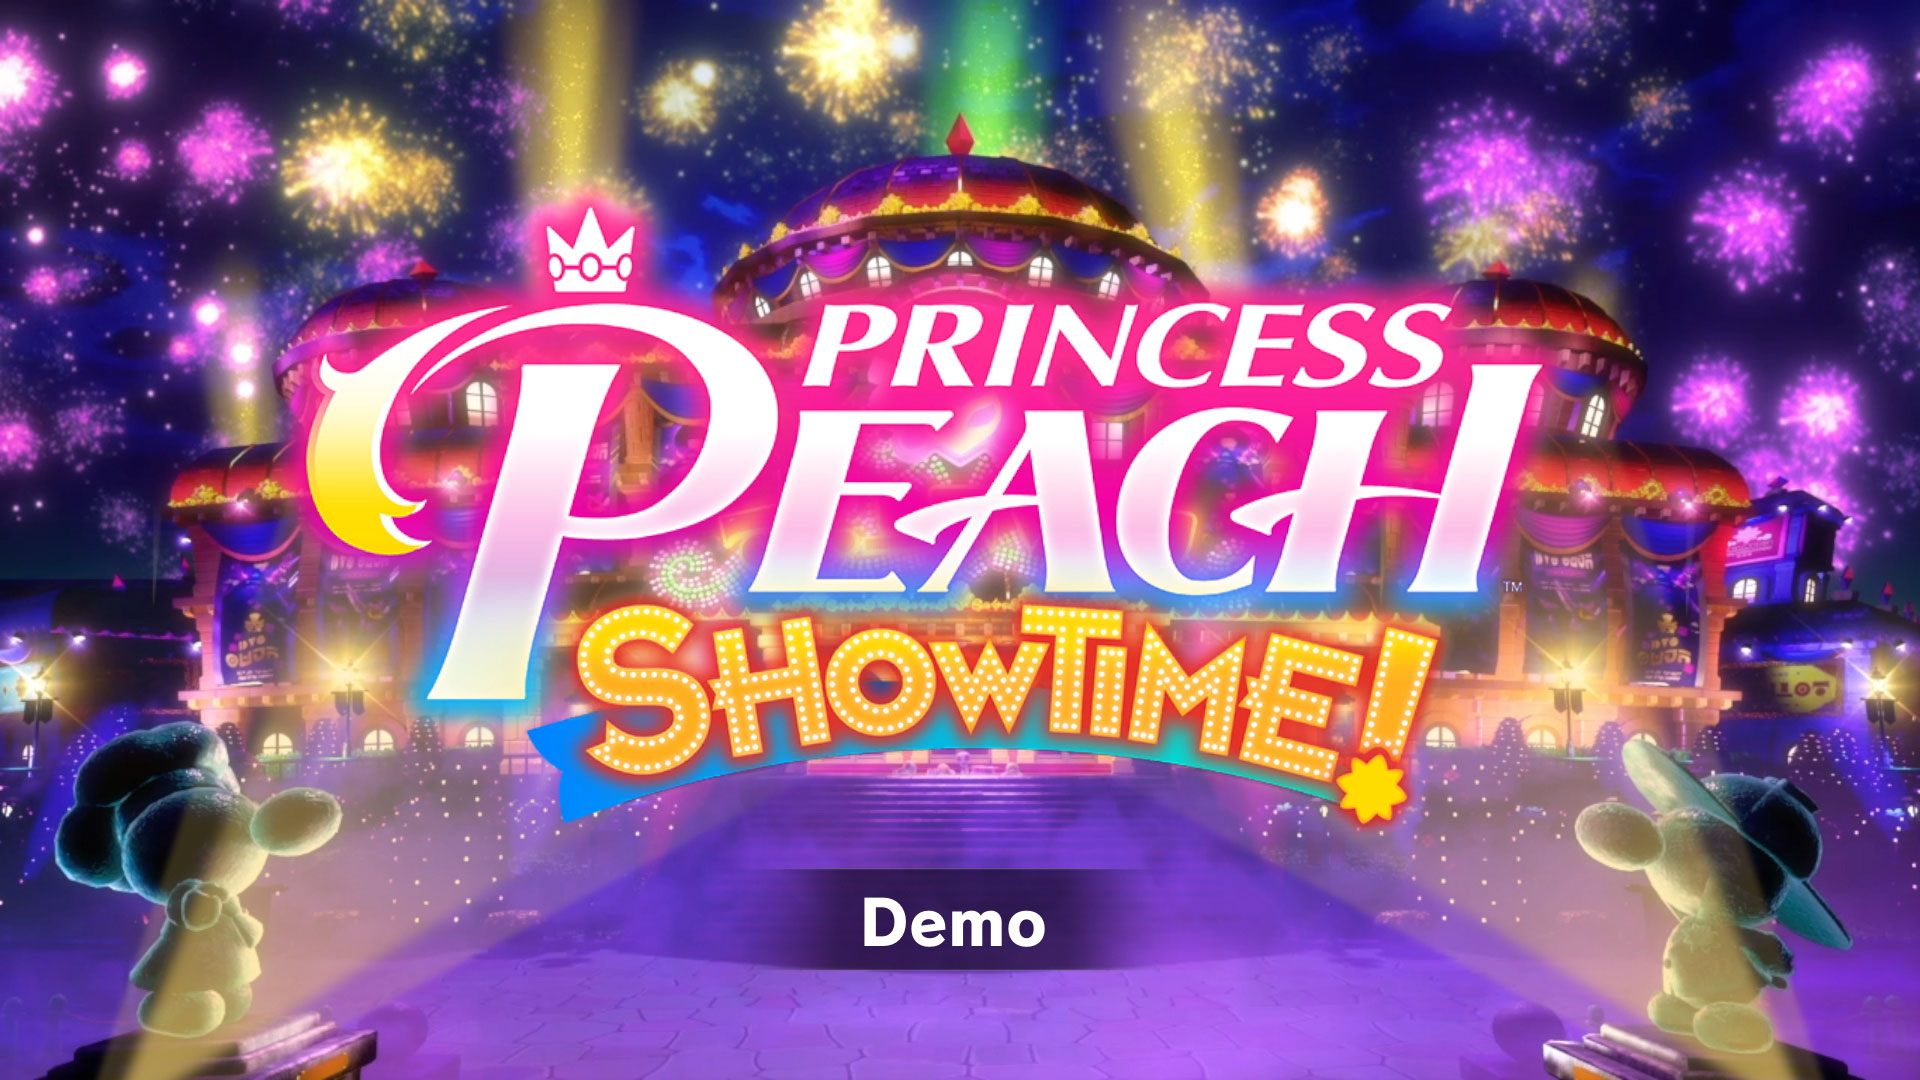 Princess Peach: Showtime! now has a demo available